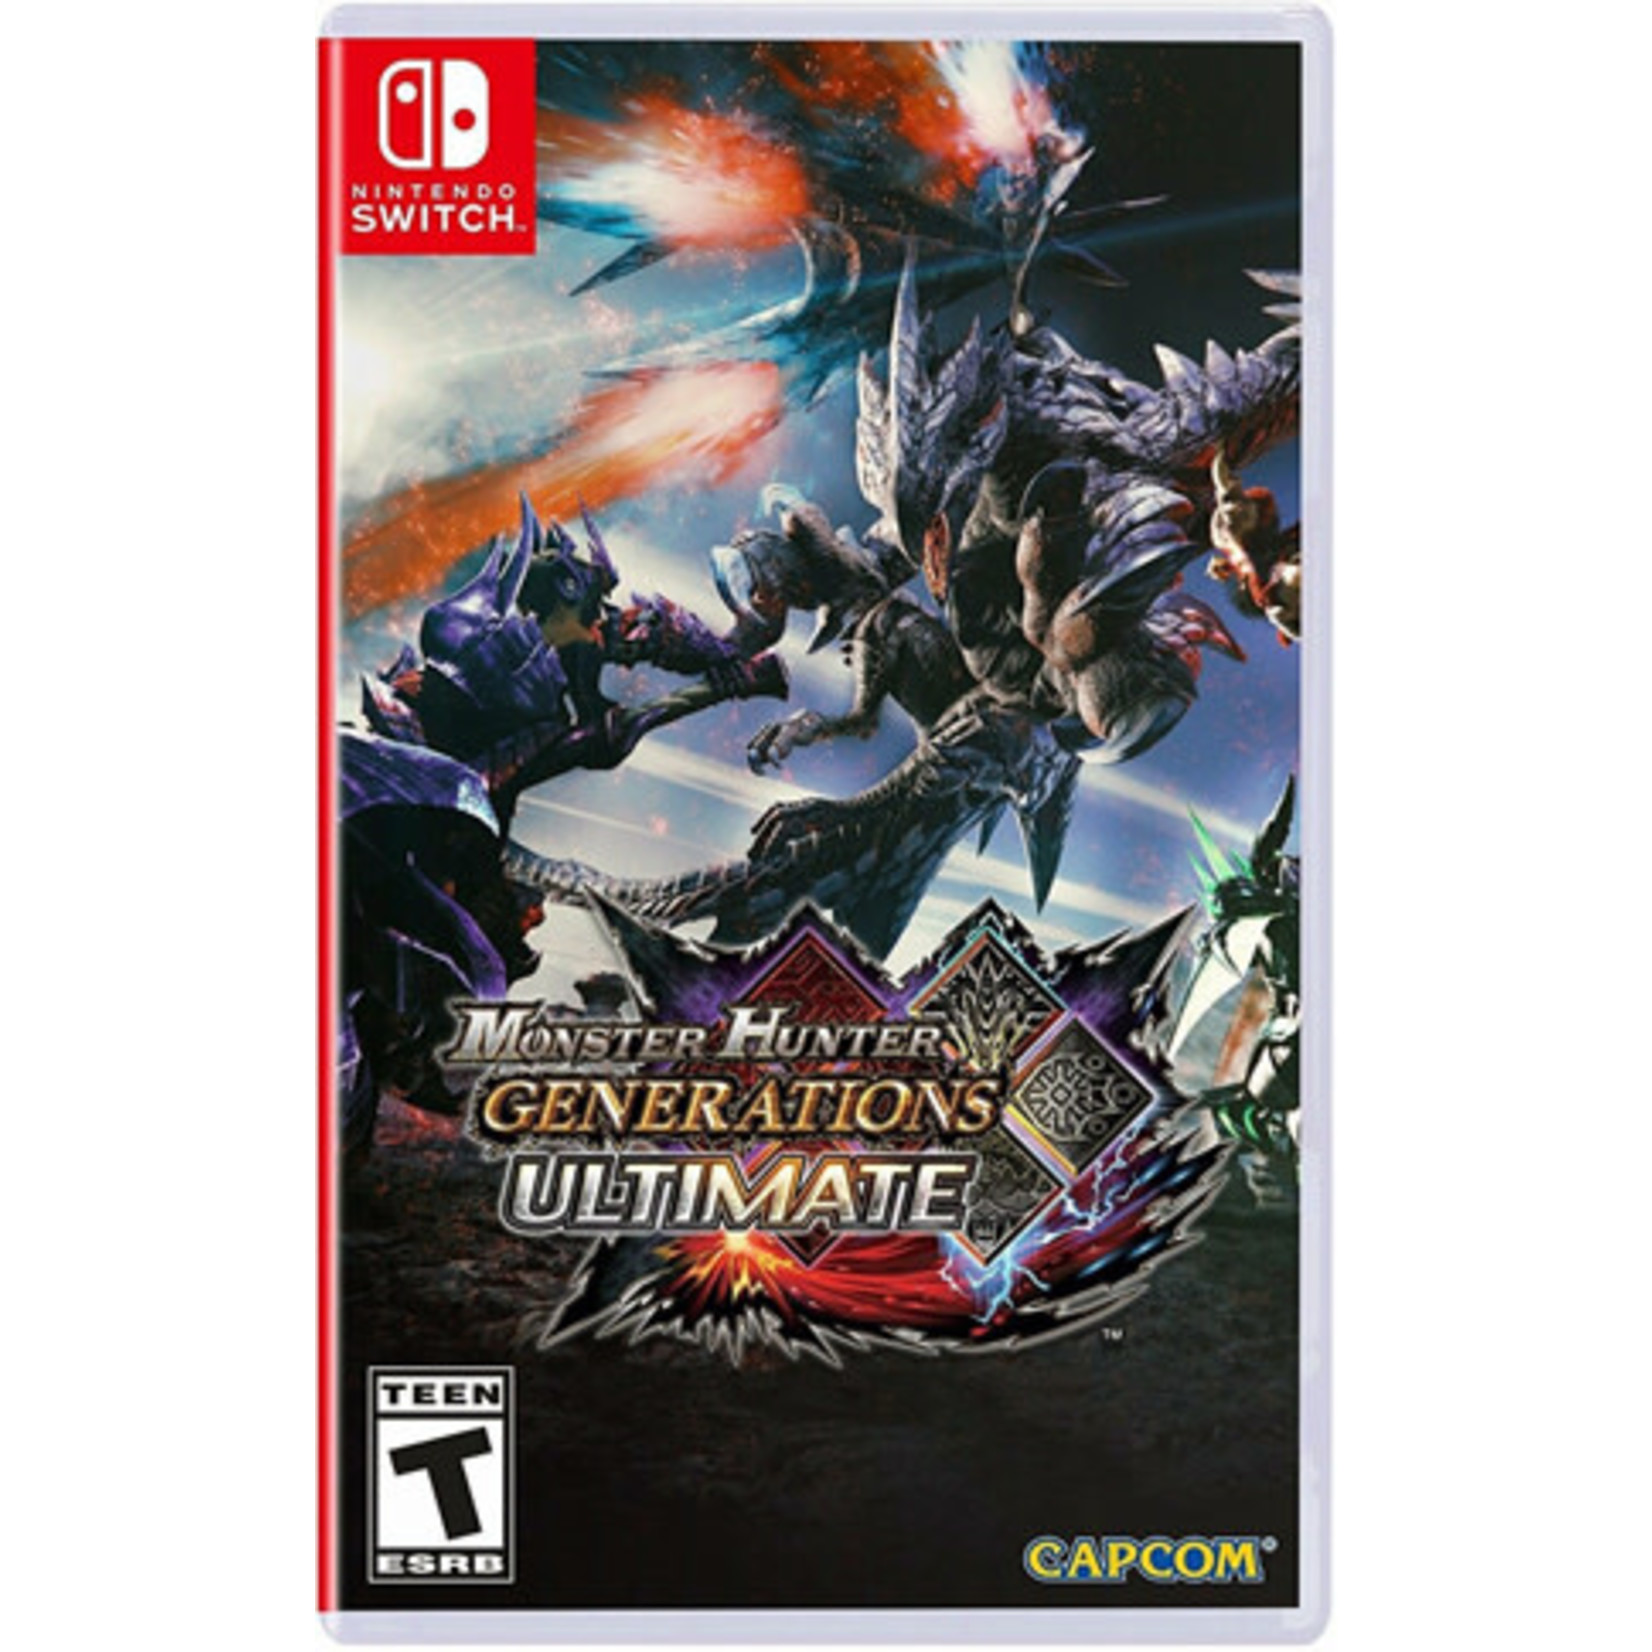 SWITCH-Monster Hunter Generations Ultimate